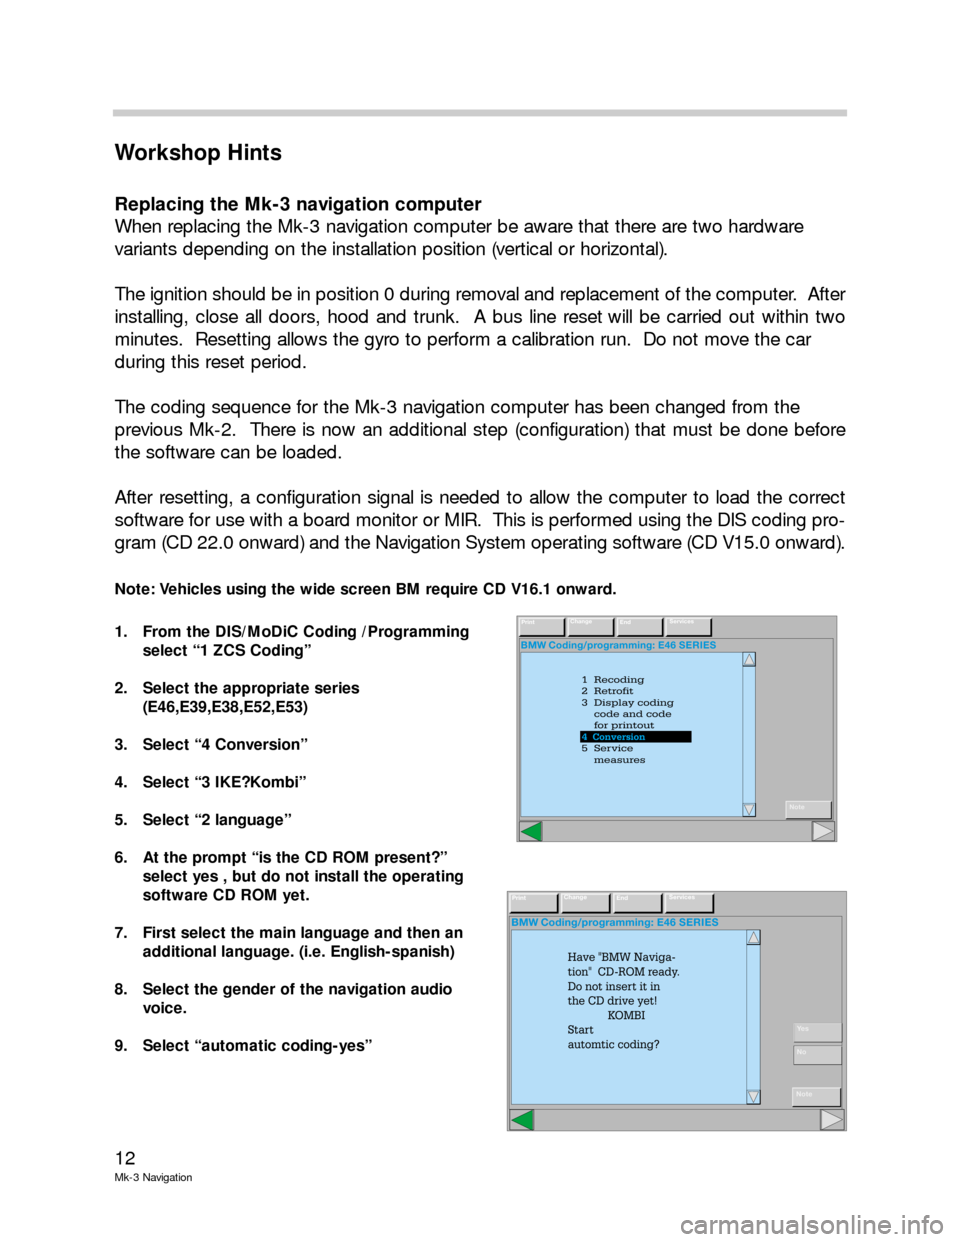 BMW 3 SERIES 2002 E46 Mk3 Navigation System Manual 12
Mk-3 Navigation
Workshop Hints
Replacing the Mk-3 navigation computer
When replacing the Mk-3 navigation computer be aware that there are two hardware 
variants depending on the installation positi